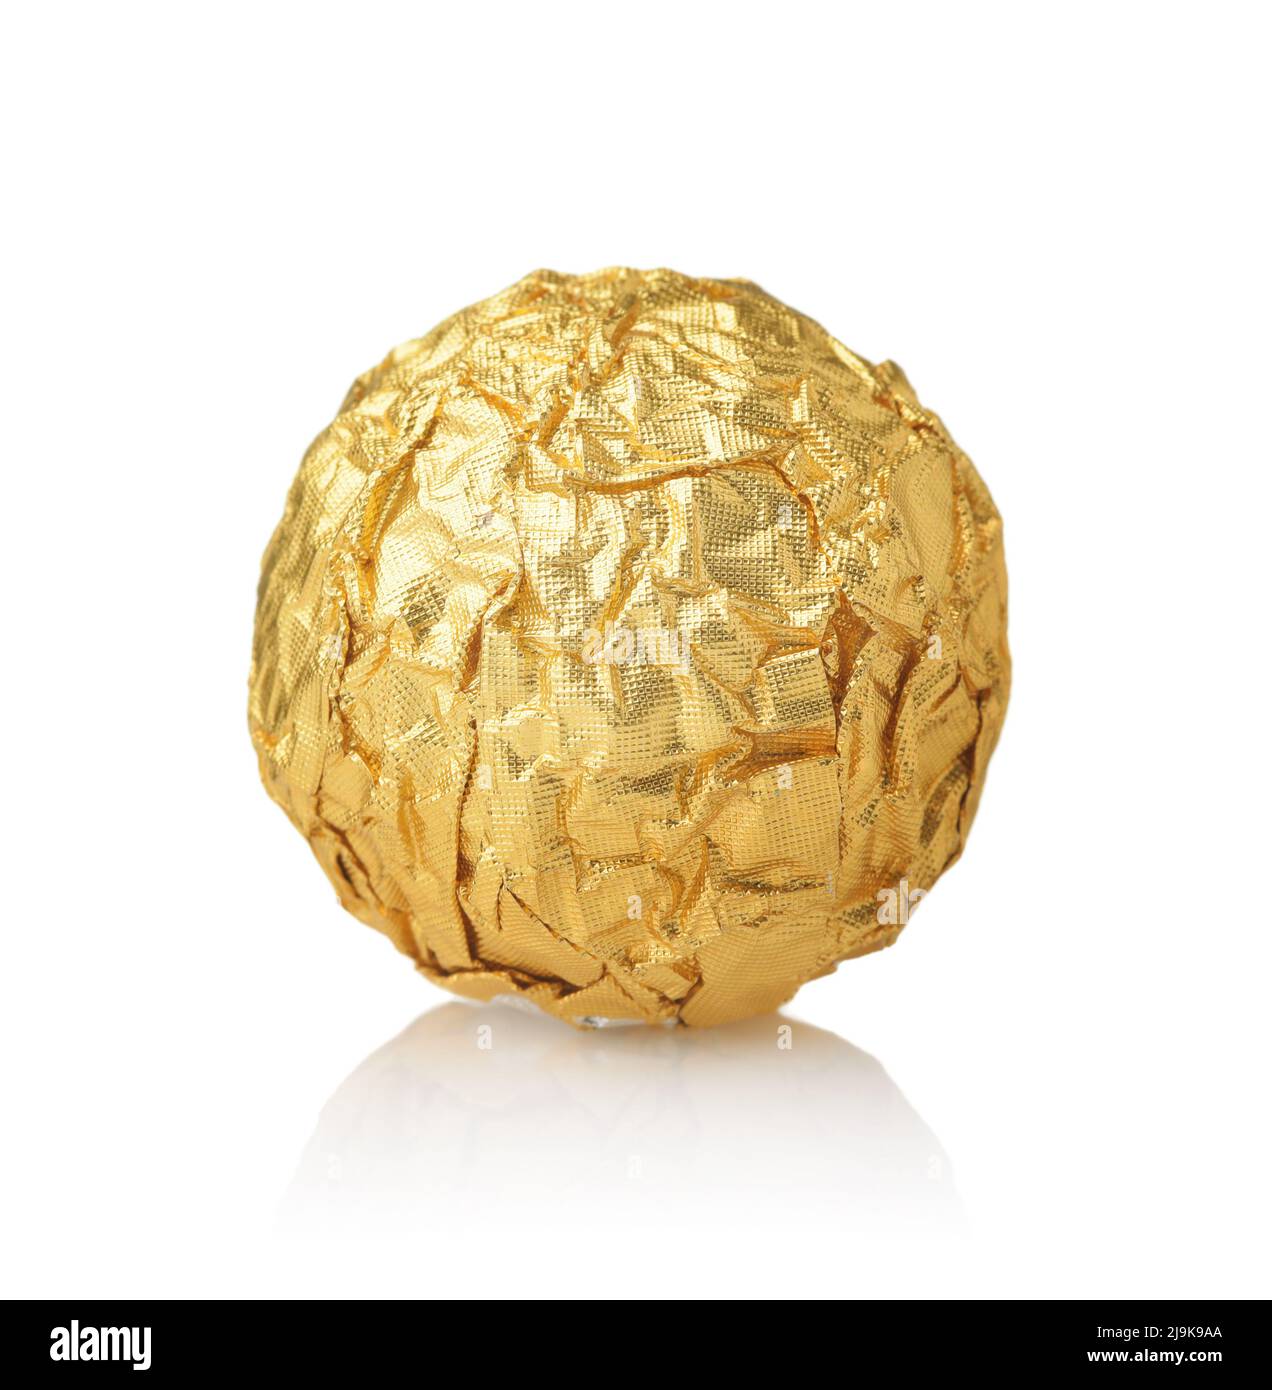 https://c8.alamy.com/comp/2J9K9AA/front-view-of-single-chocolate-ball-candy-in-gold-foil-wrapper-isolated-on-white-2J9K9AA.jpg